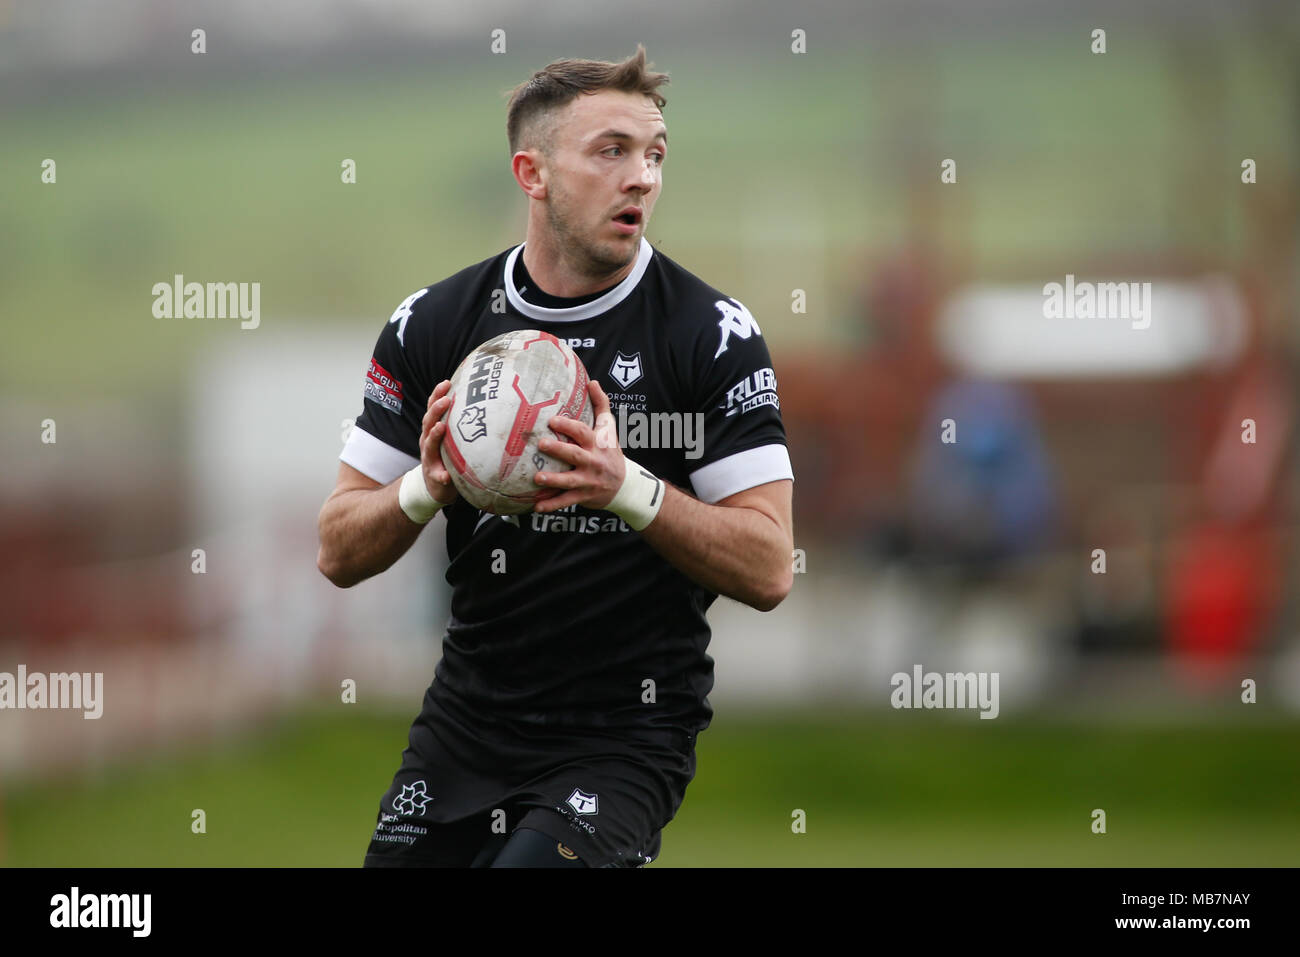 Fox's Biscuit Stadium, Batley, West Yorkshire, 7 April 2018.   Betfred Rugby League Championship : Batley Bulldogs vs Toronto Wolfpack  Ryan Brierley of Toronto Wolfpack  Credit: Touchlinepics/Alamy Live News Stock Photo